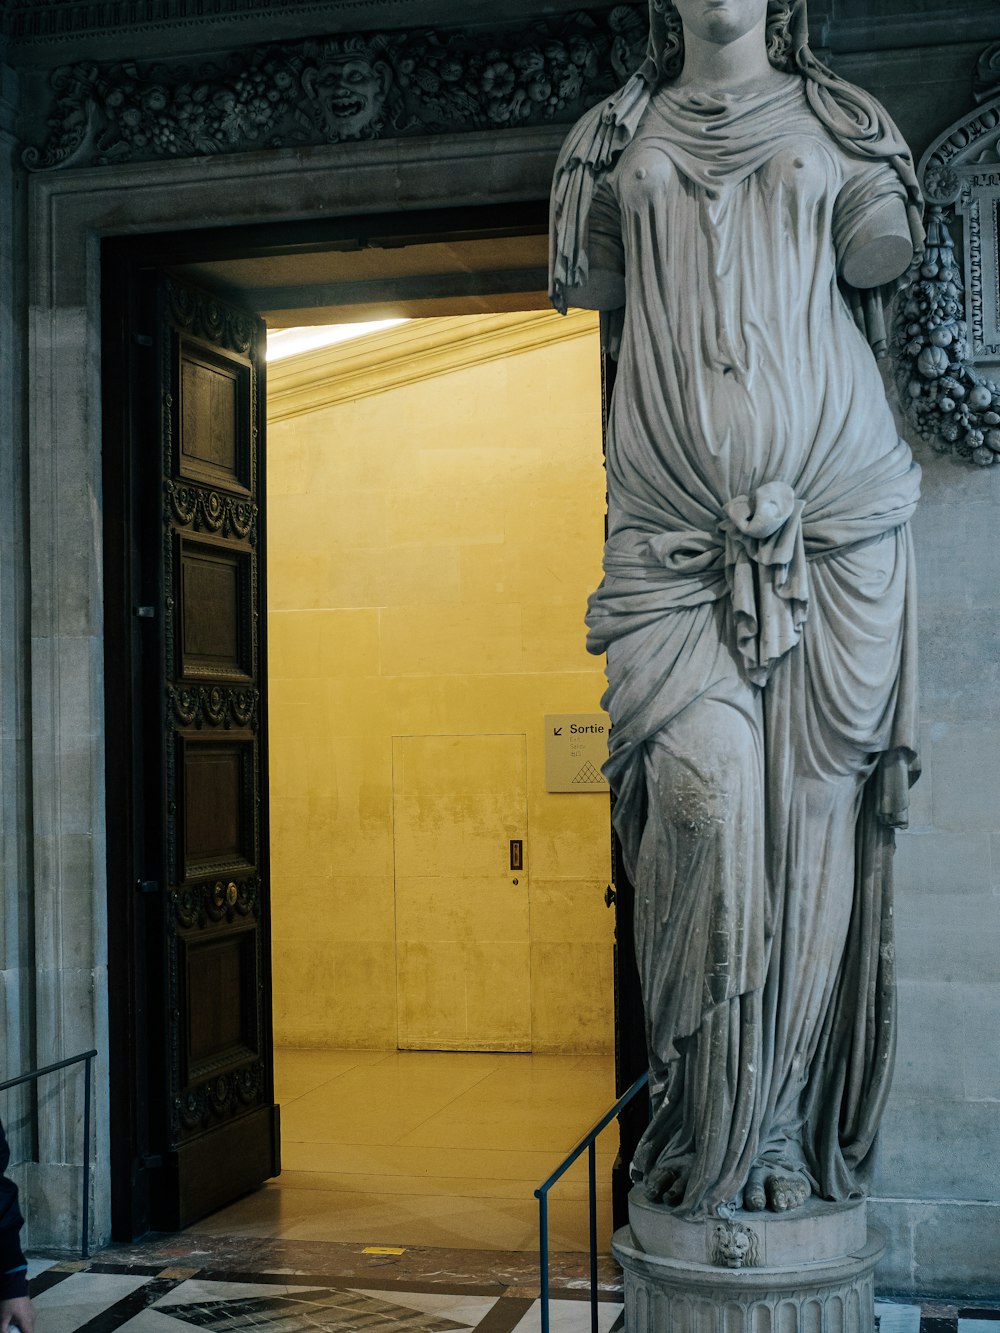 a statue of a woman standing in front of a doorway